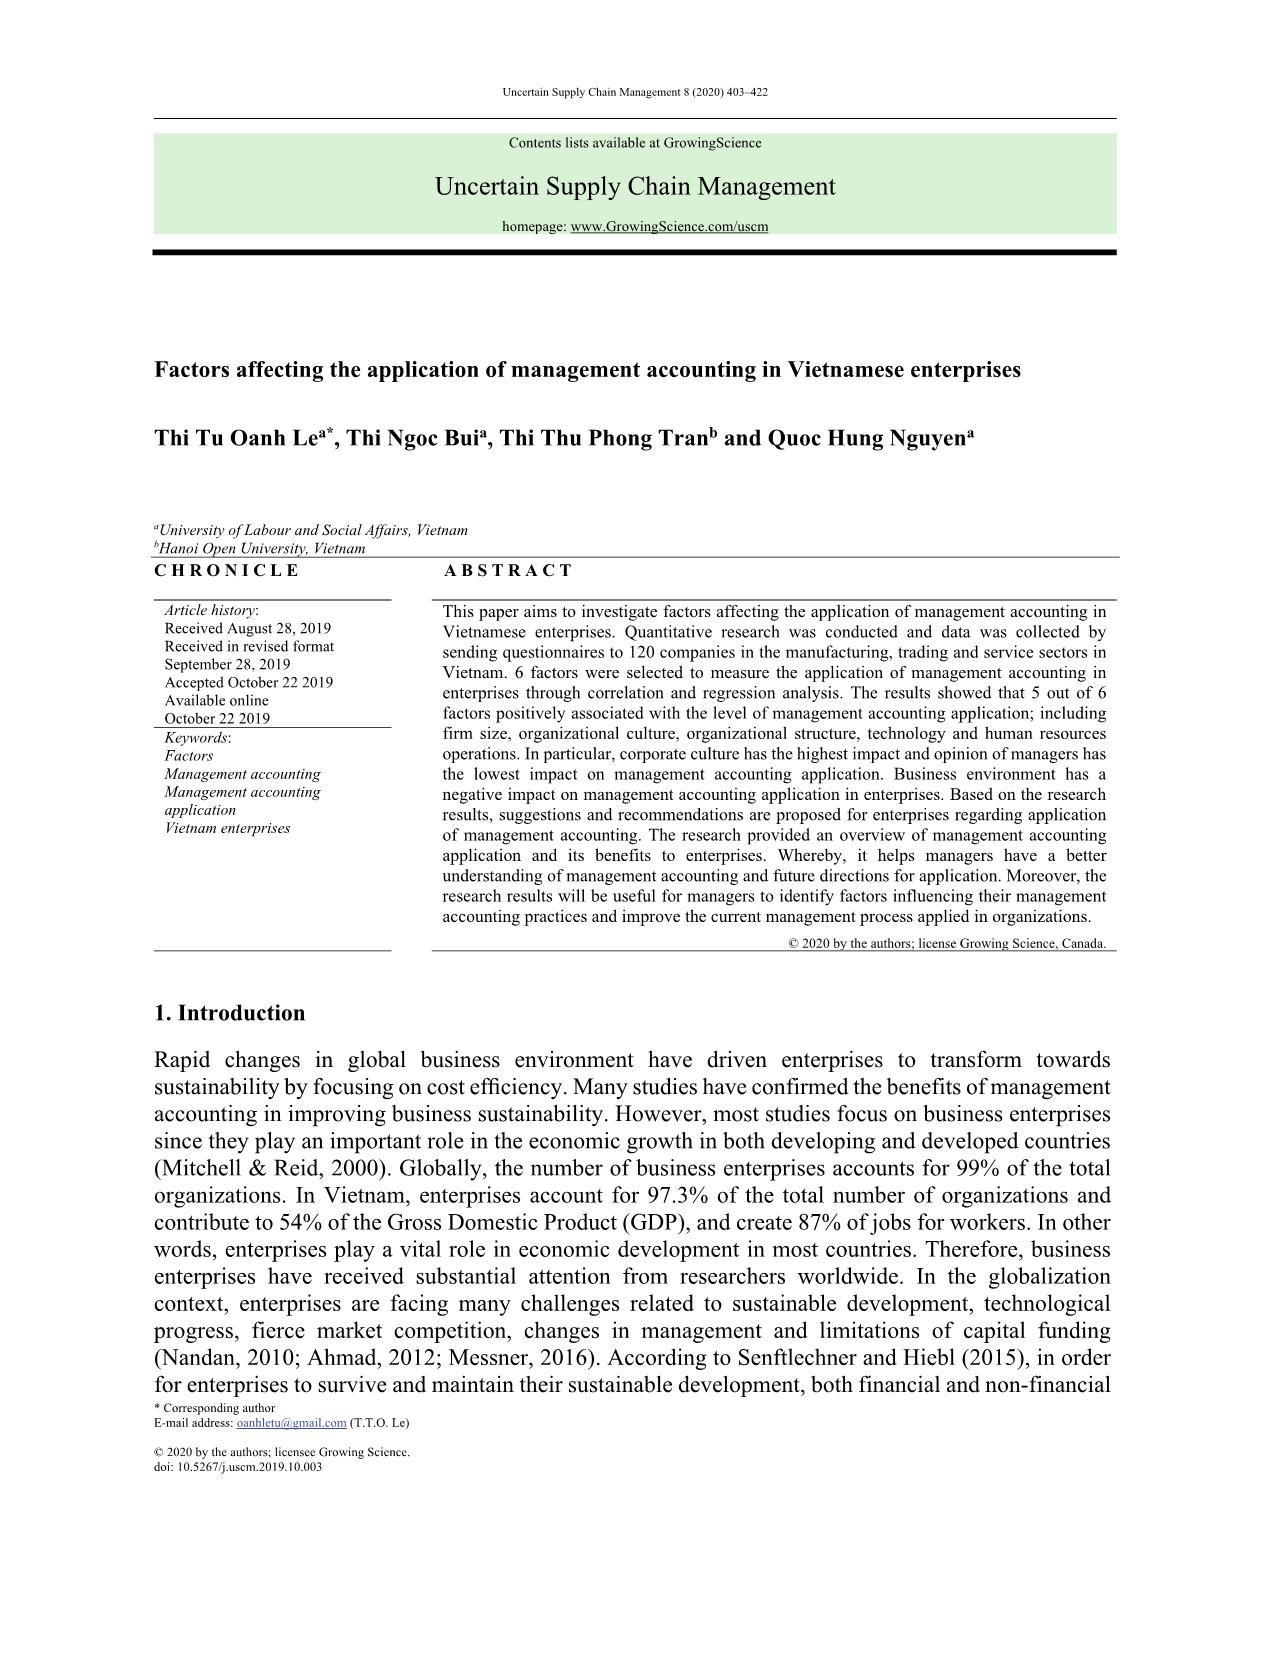 Factors affecting the application of management accounting in Vietnamese enterprises trang 1